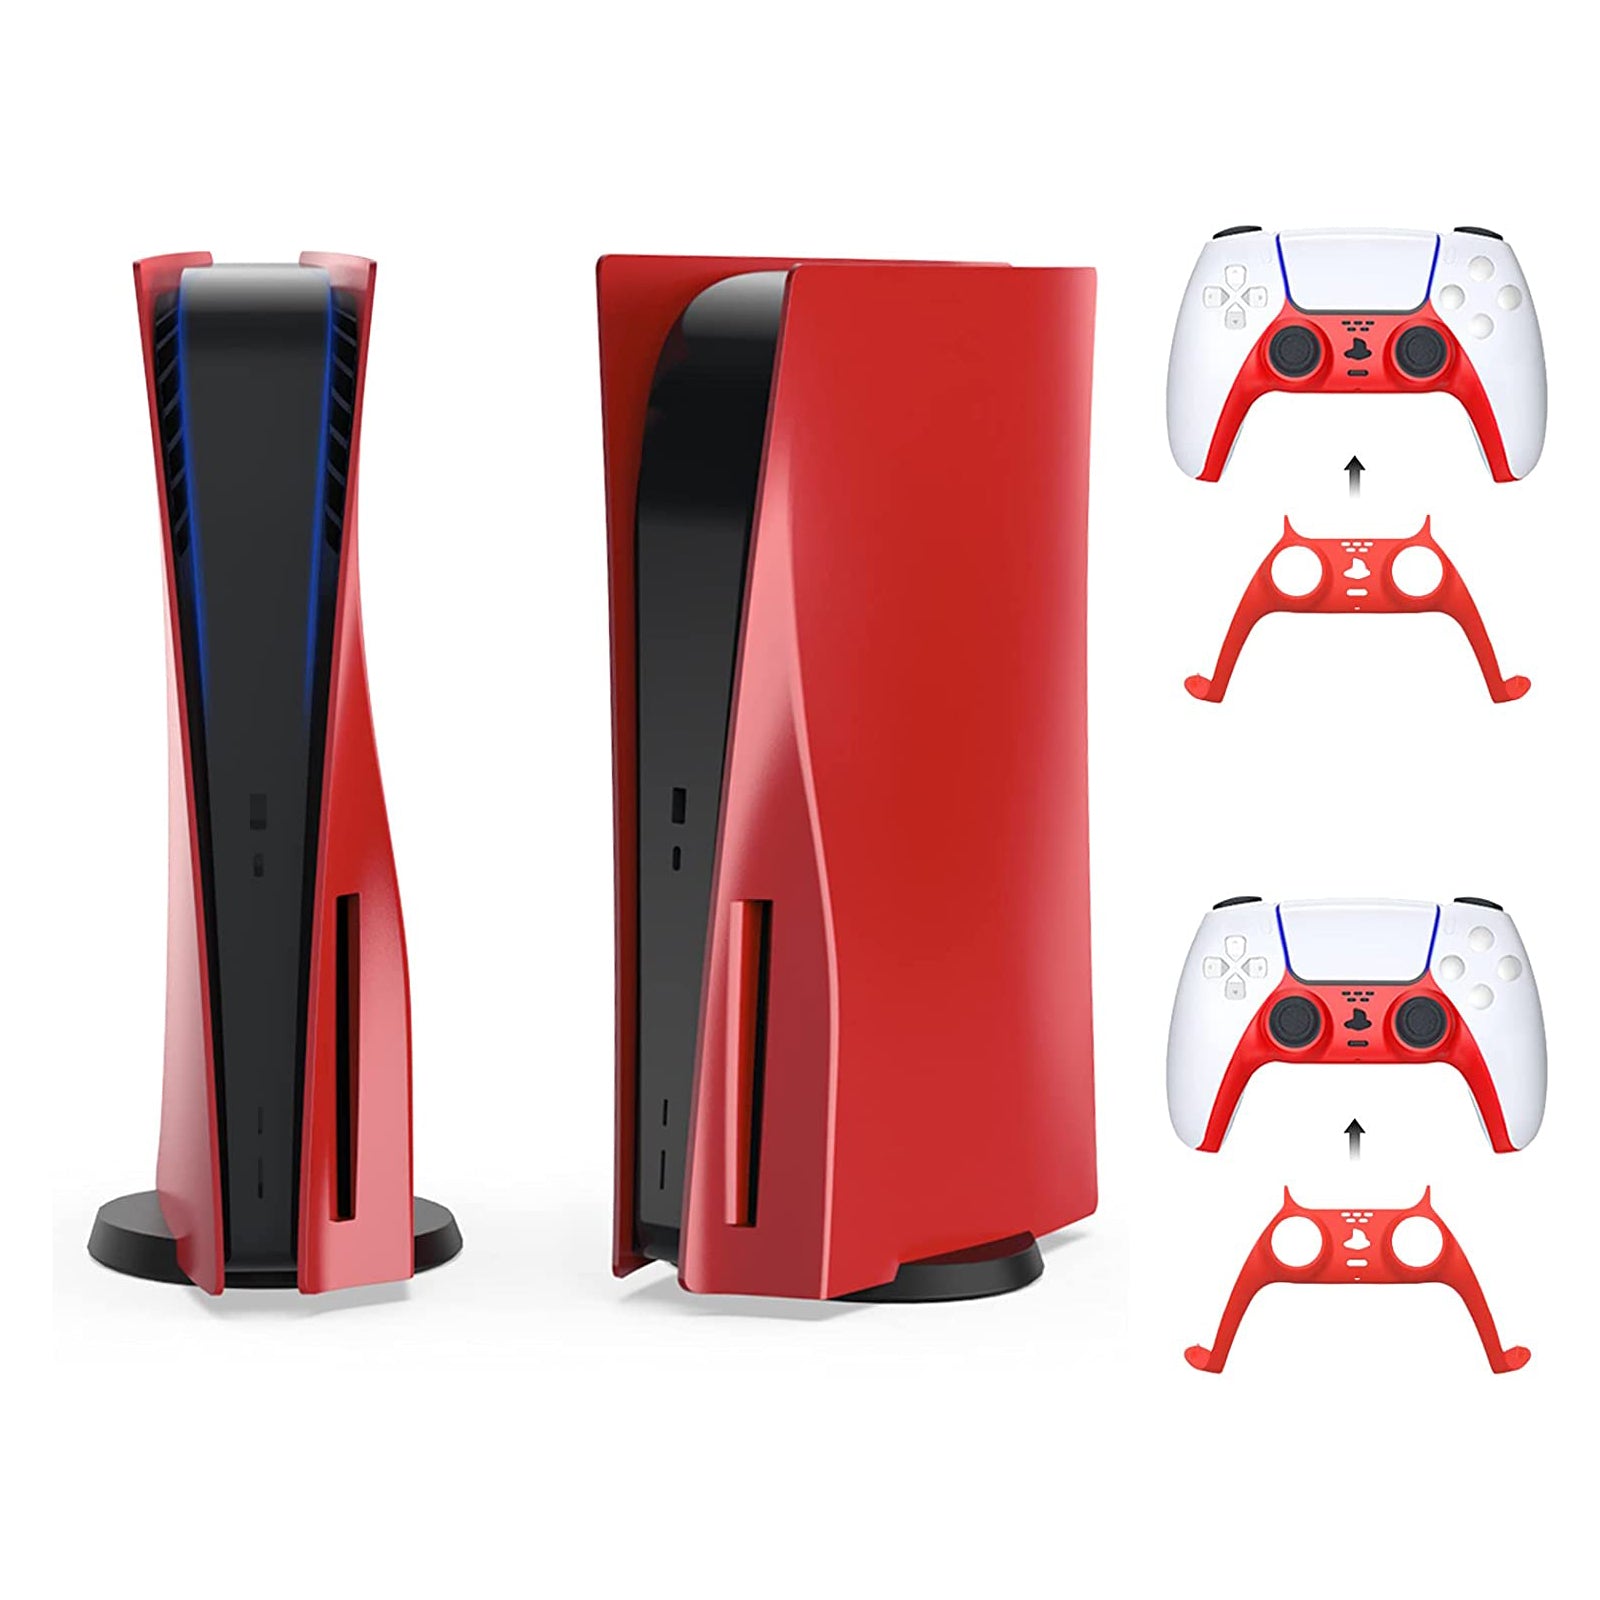 NexiGo PS5 Console and Controller Stylish Cover Kit (Red)